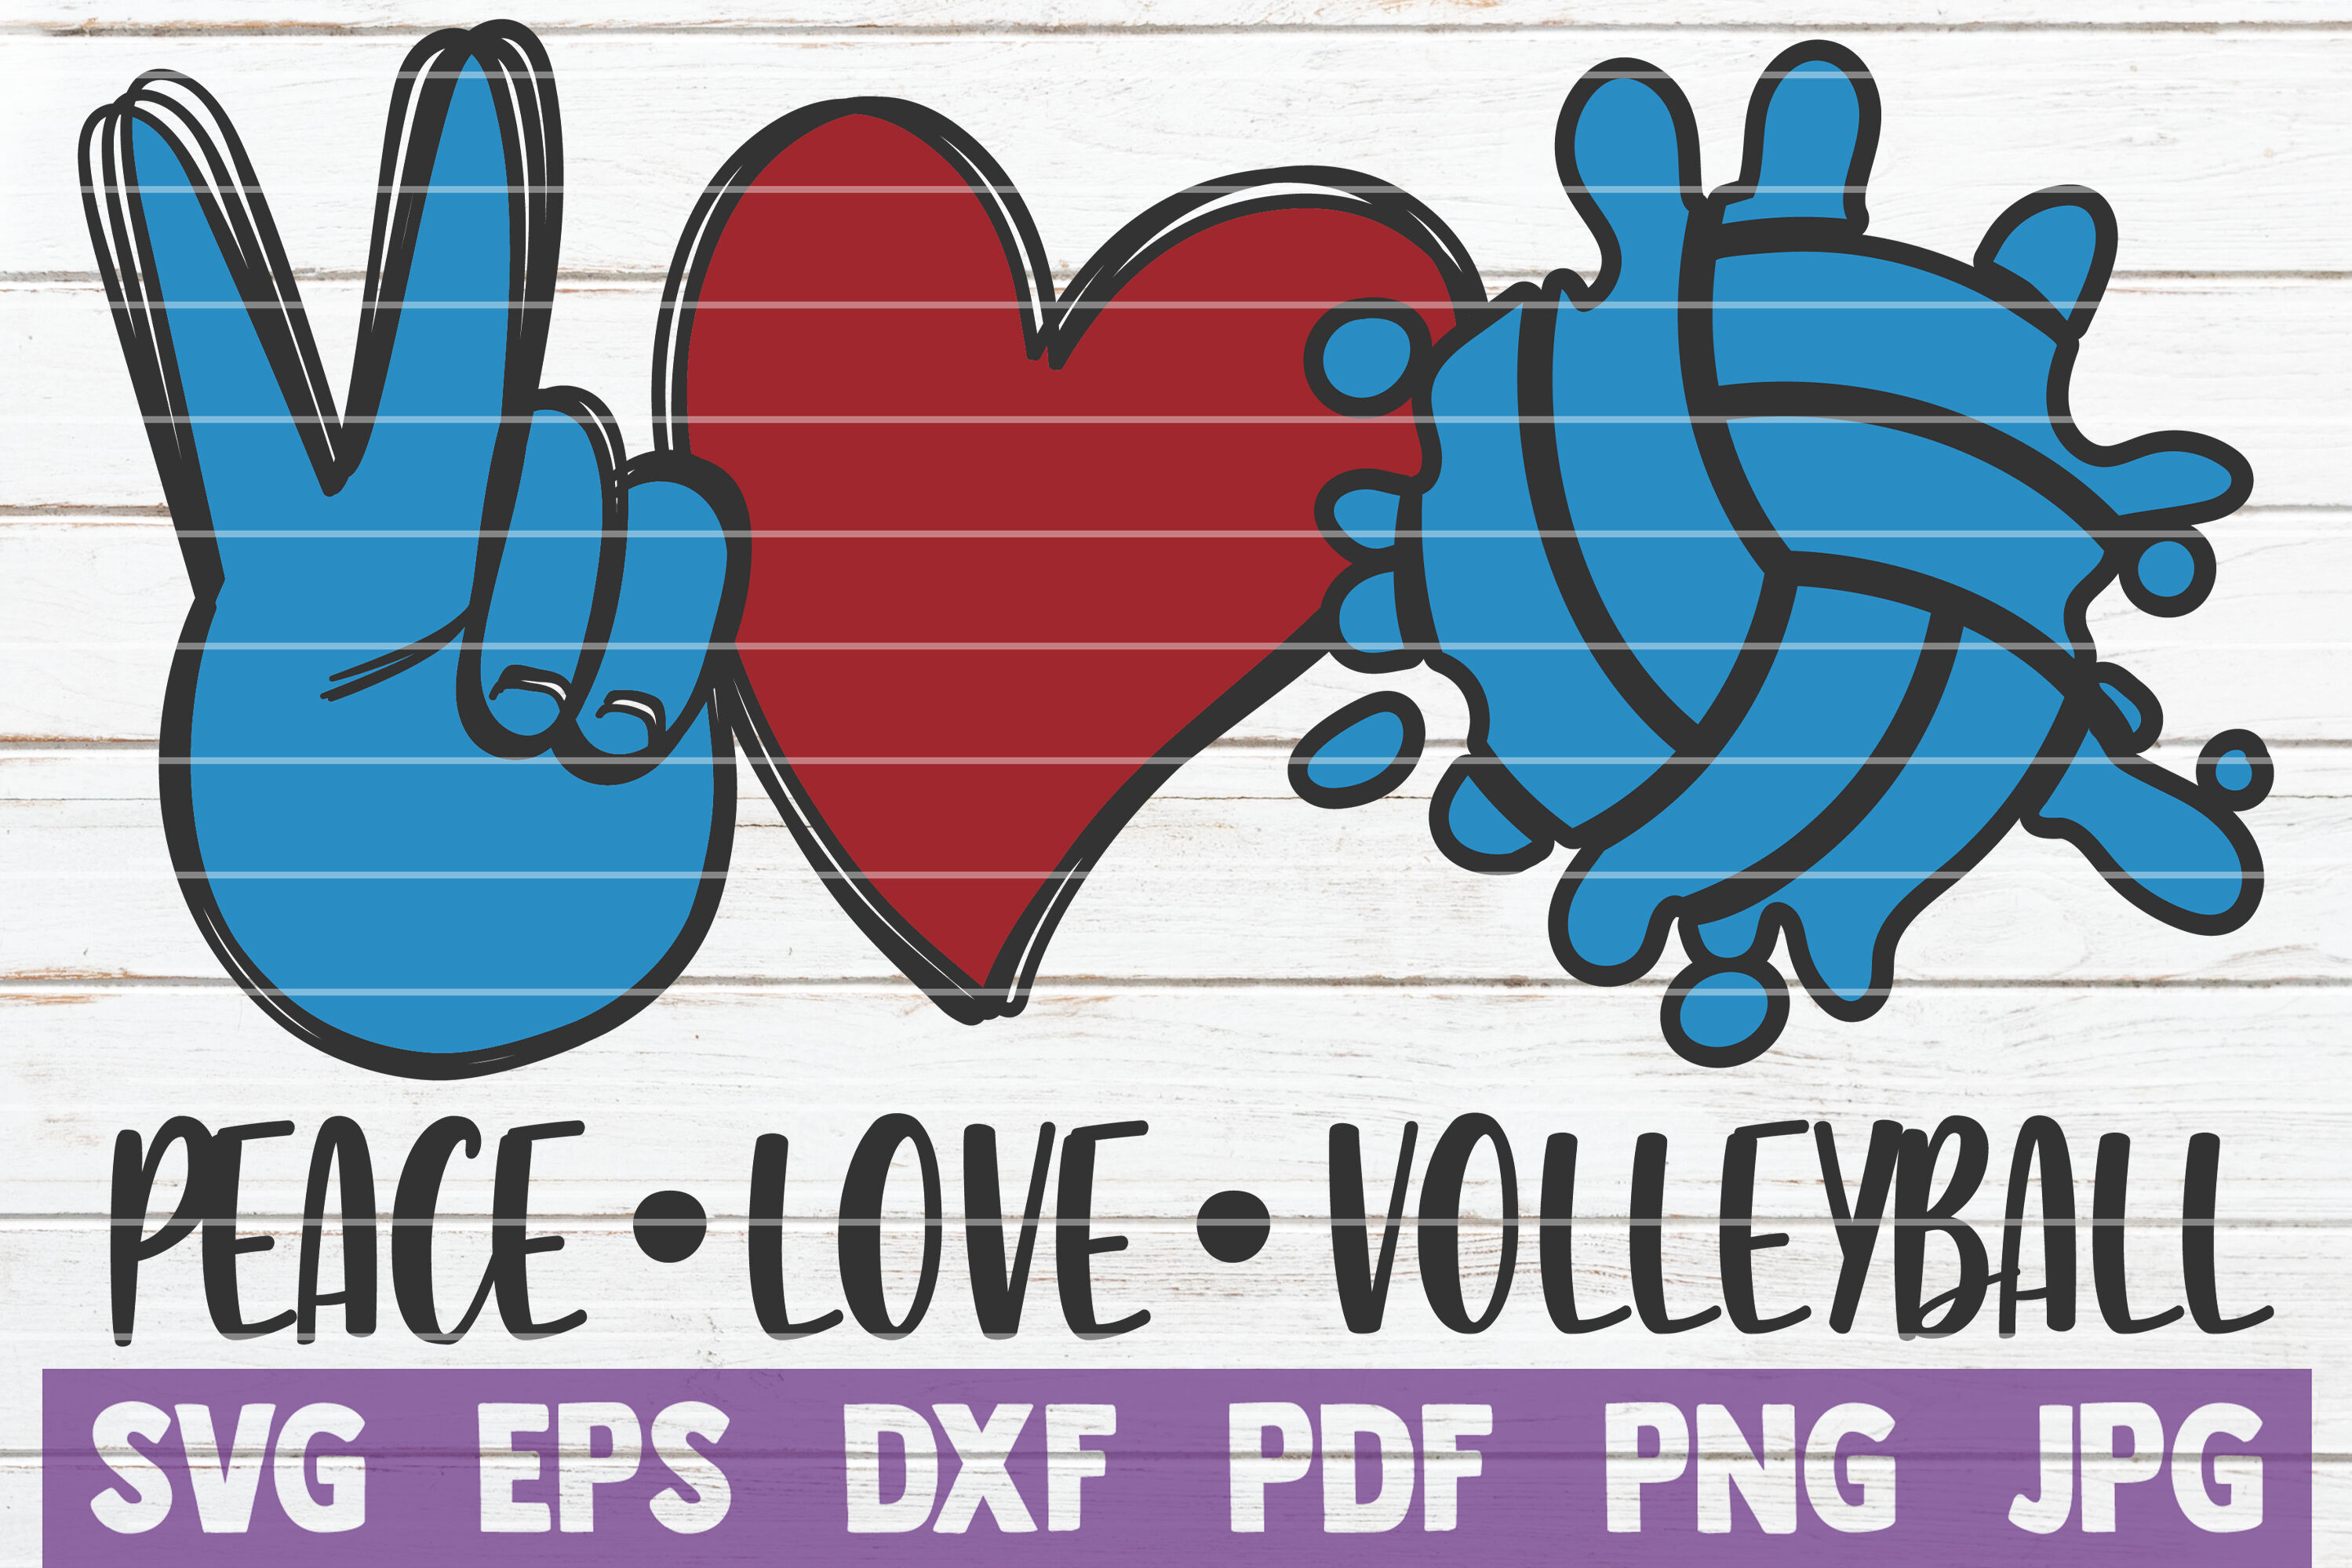 Download Peace Love Volleyball Svg Cut File By Mintymarshmallows Thehungryjpeg Com